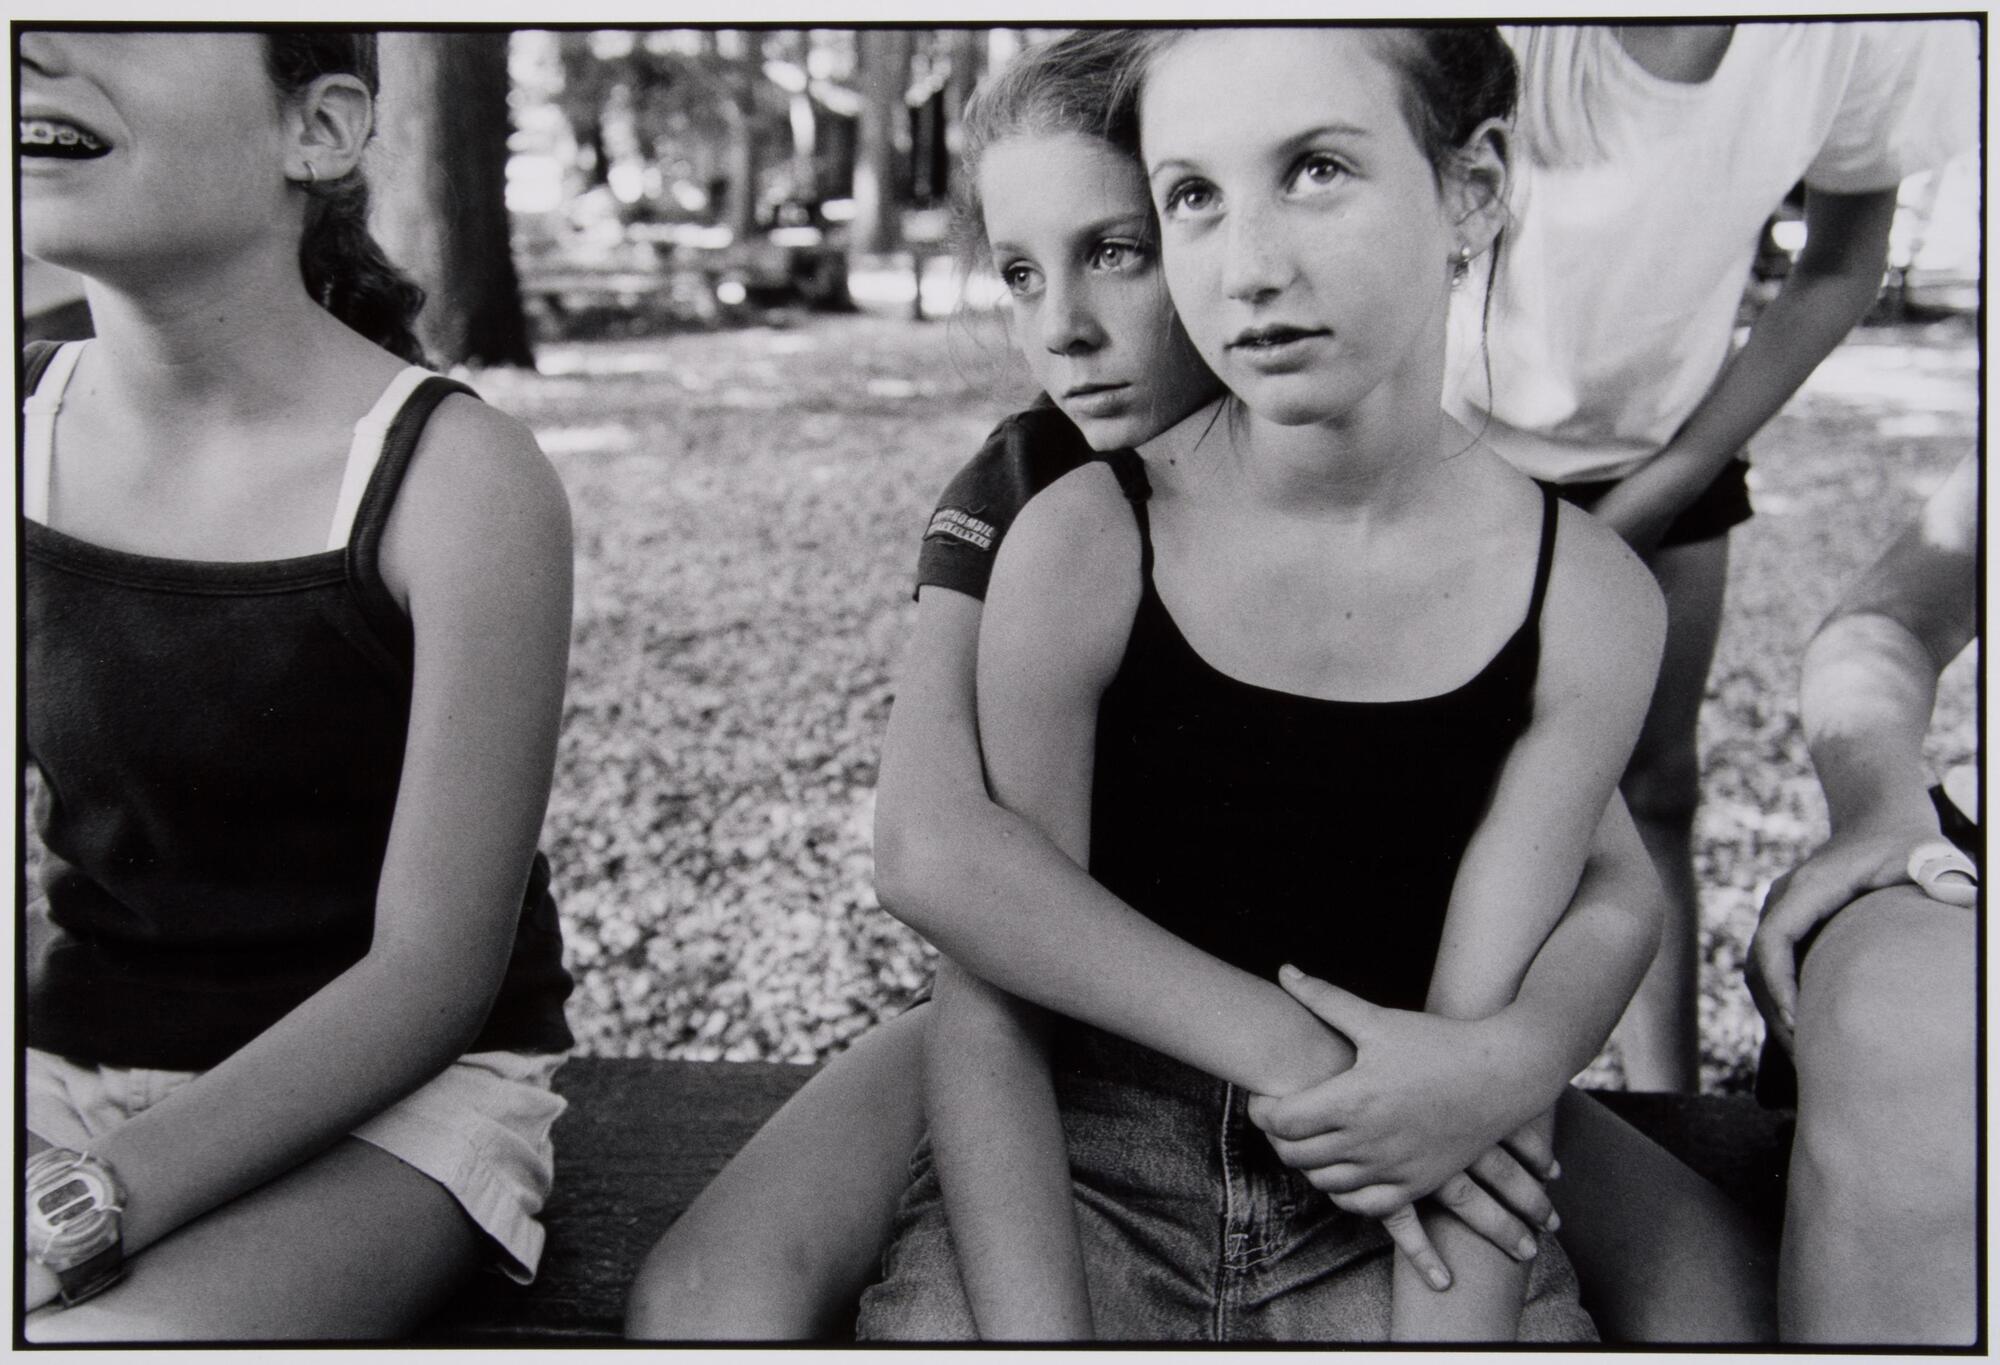 Three girls are seated on a bench and one girl is behind the other giving her a hug. The girls in the front are wearing dark tanktops. The girl in the back is wearing a darker tshirt.